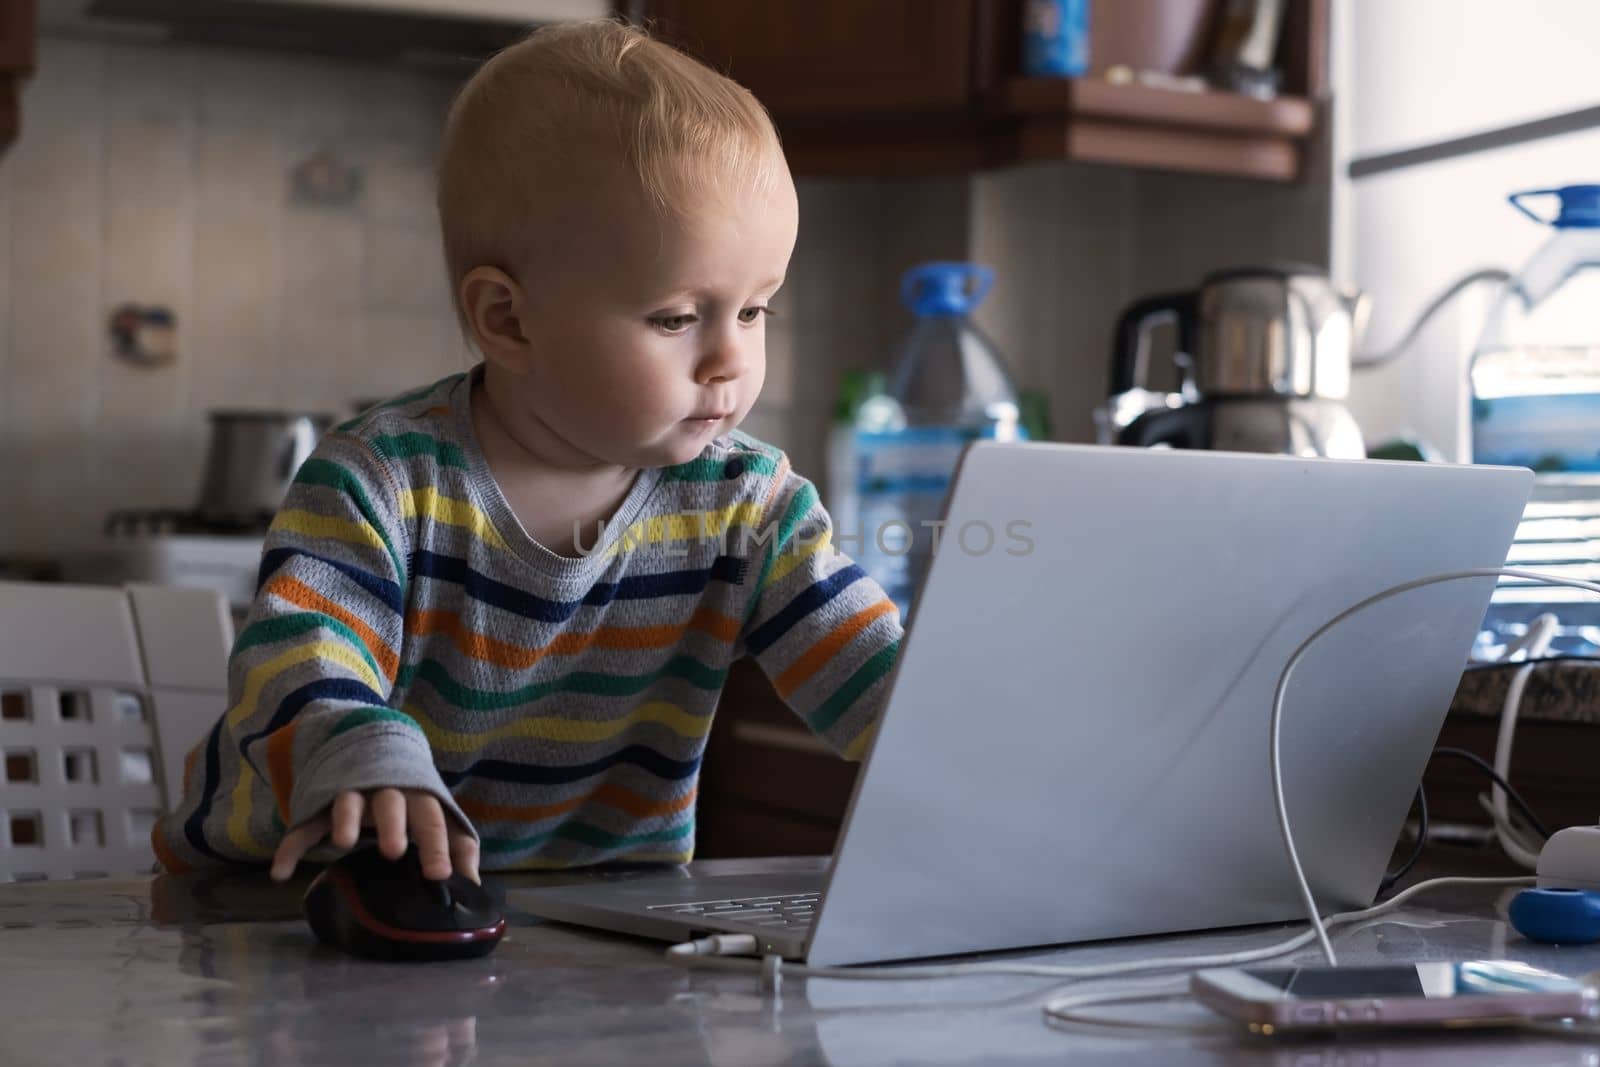 Little baby curiously looking at laptop surfing in internet by koldunov